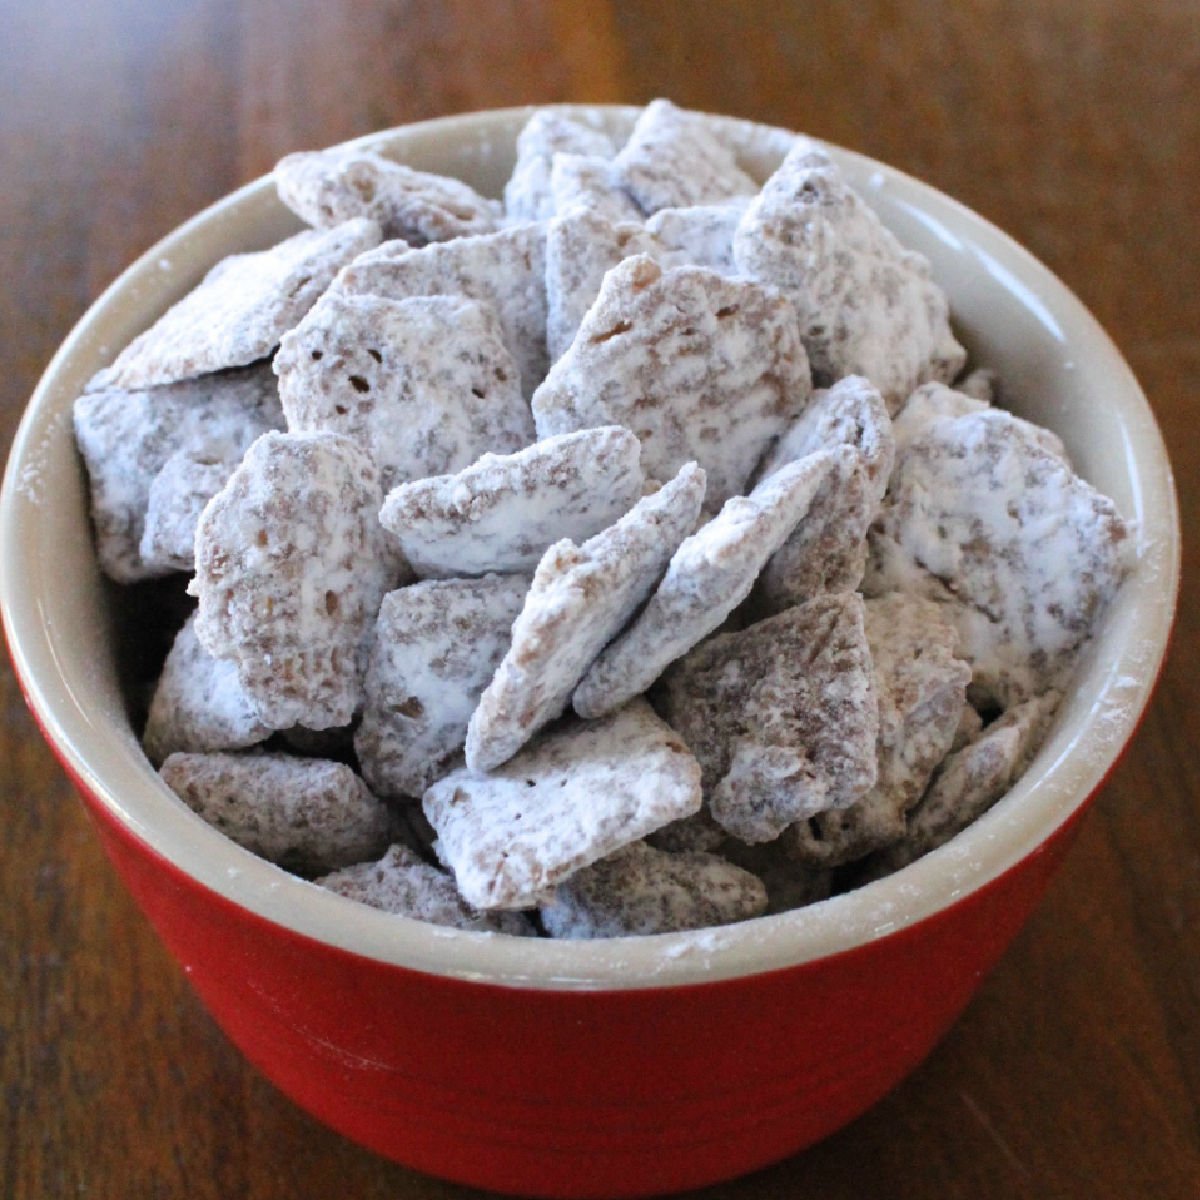 Confectioner coated cereal treat known as puppy chow in a small red bowl.